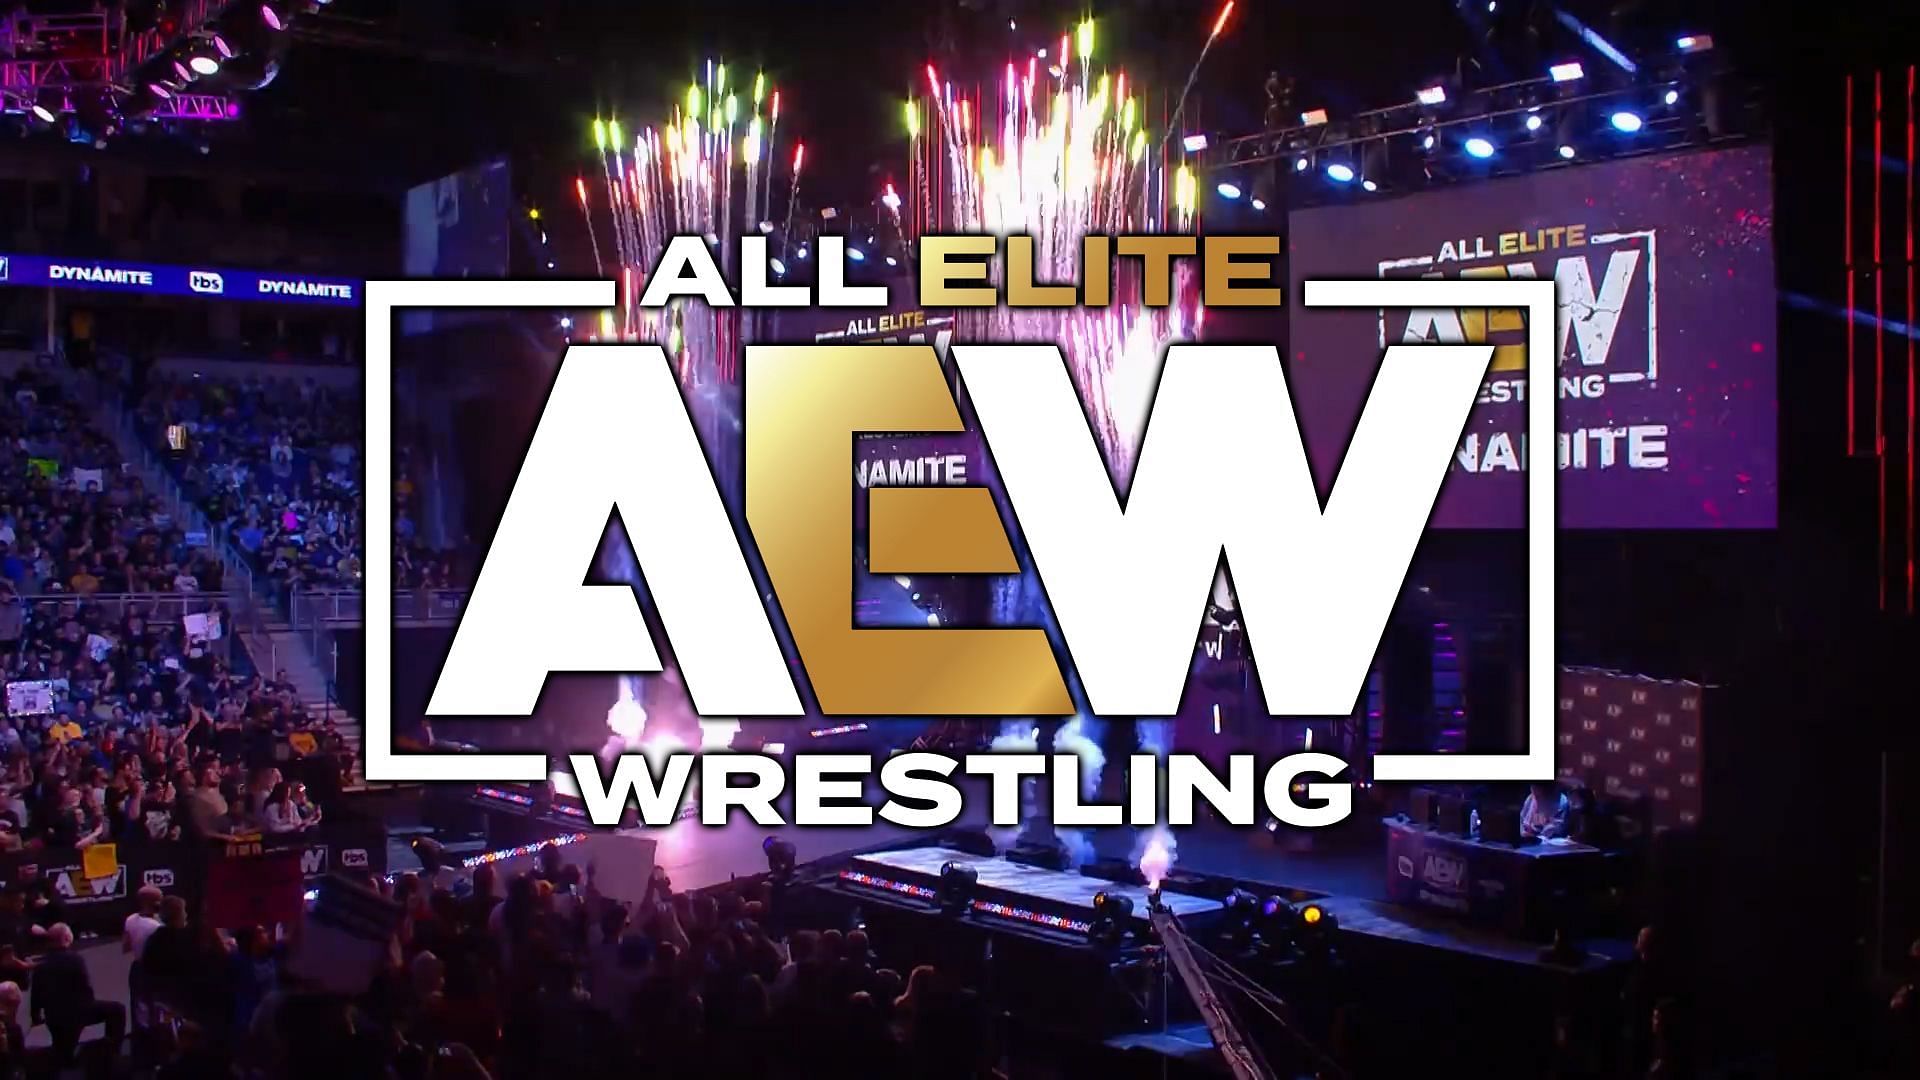 All Elite Wrestling has made headlines recently (image credit: AEW on YouTube)